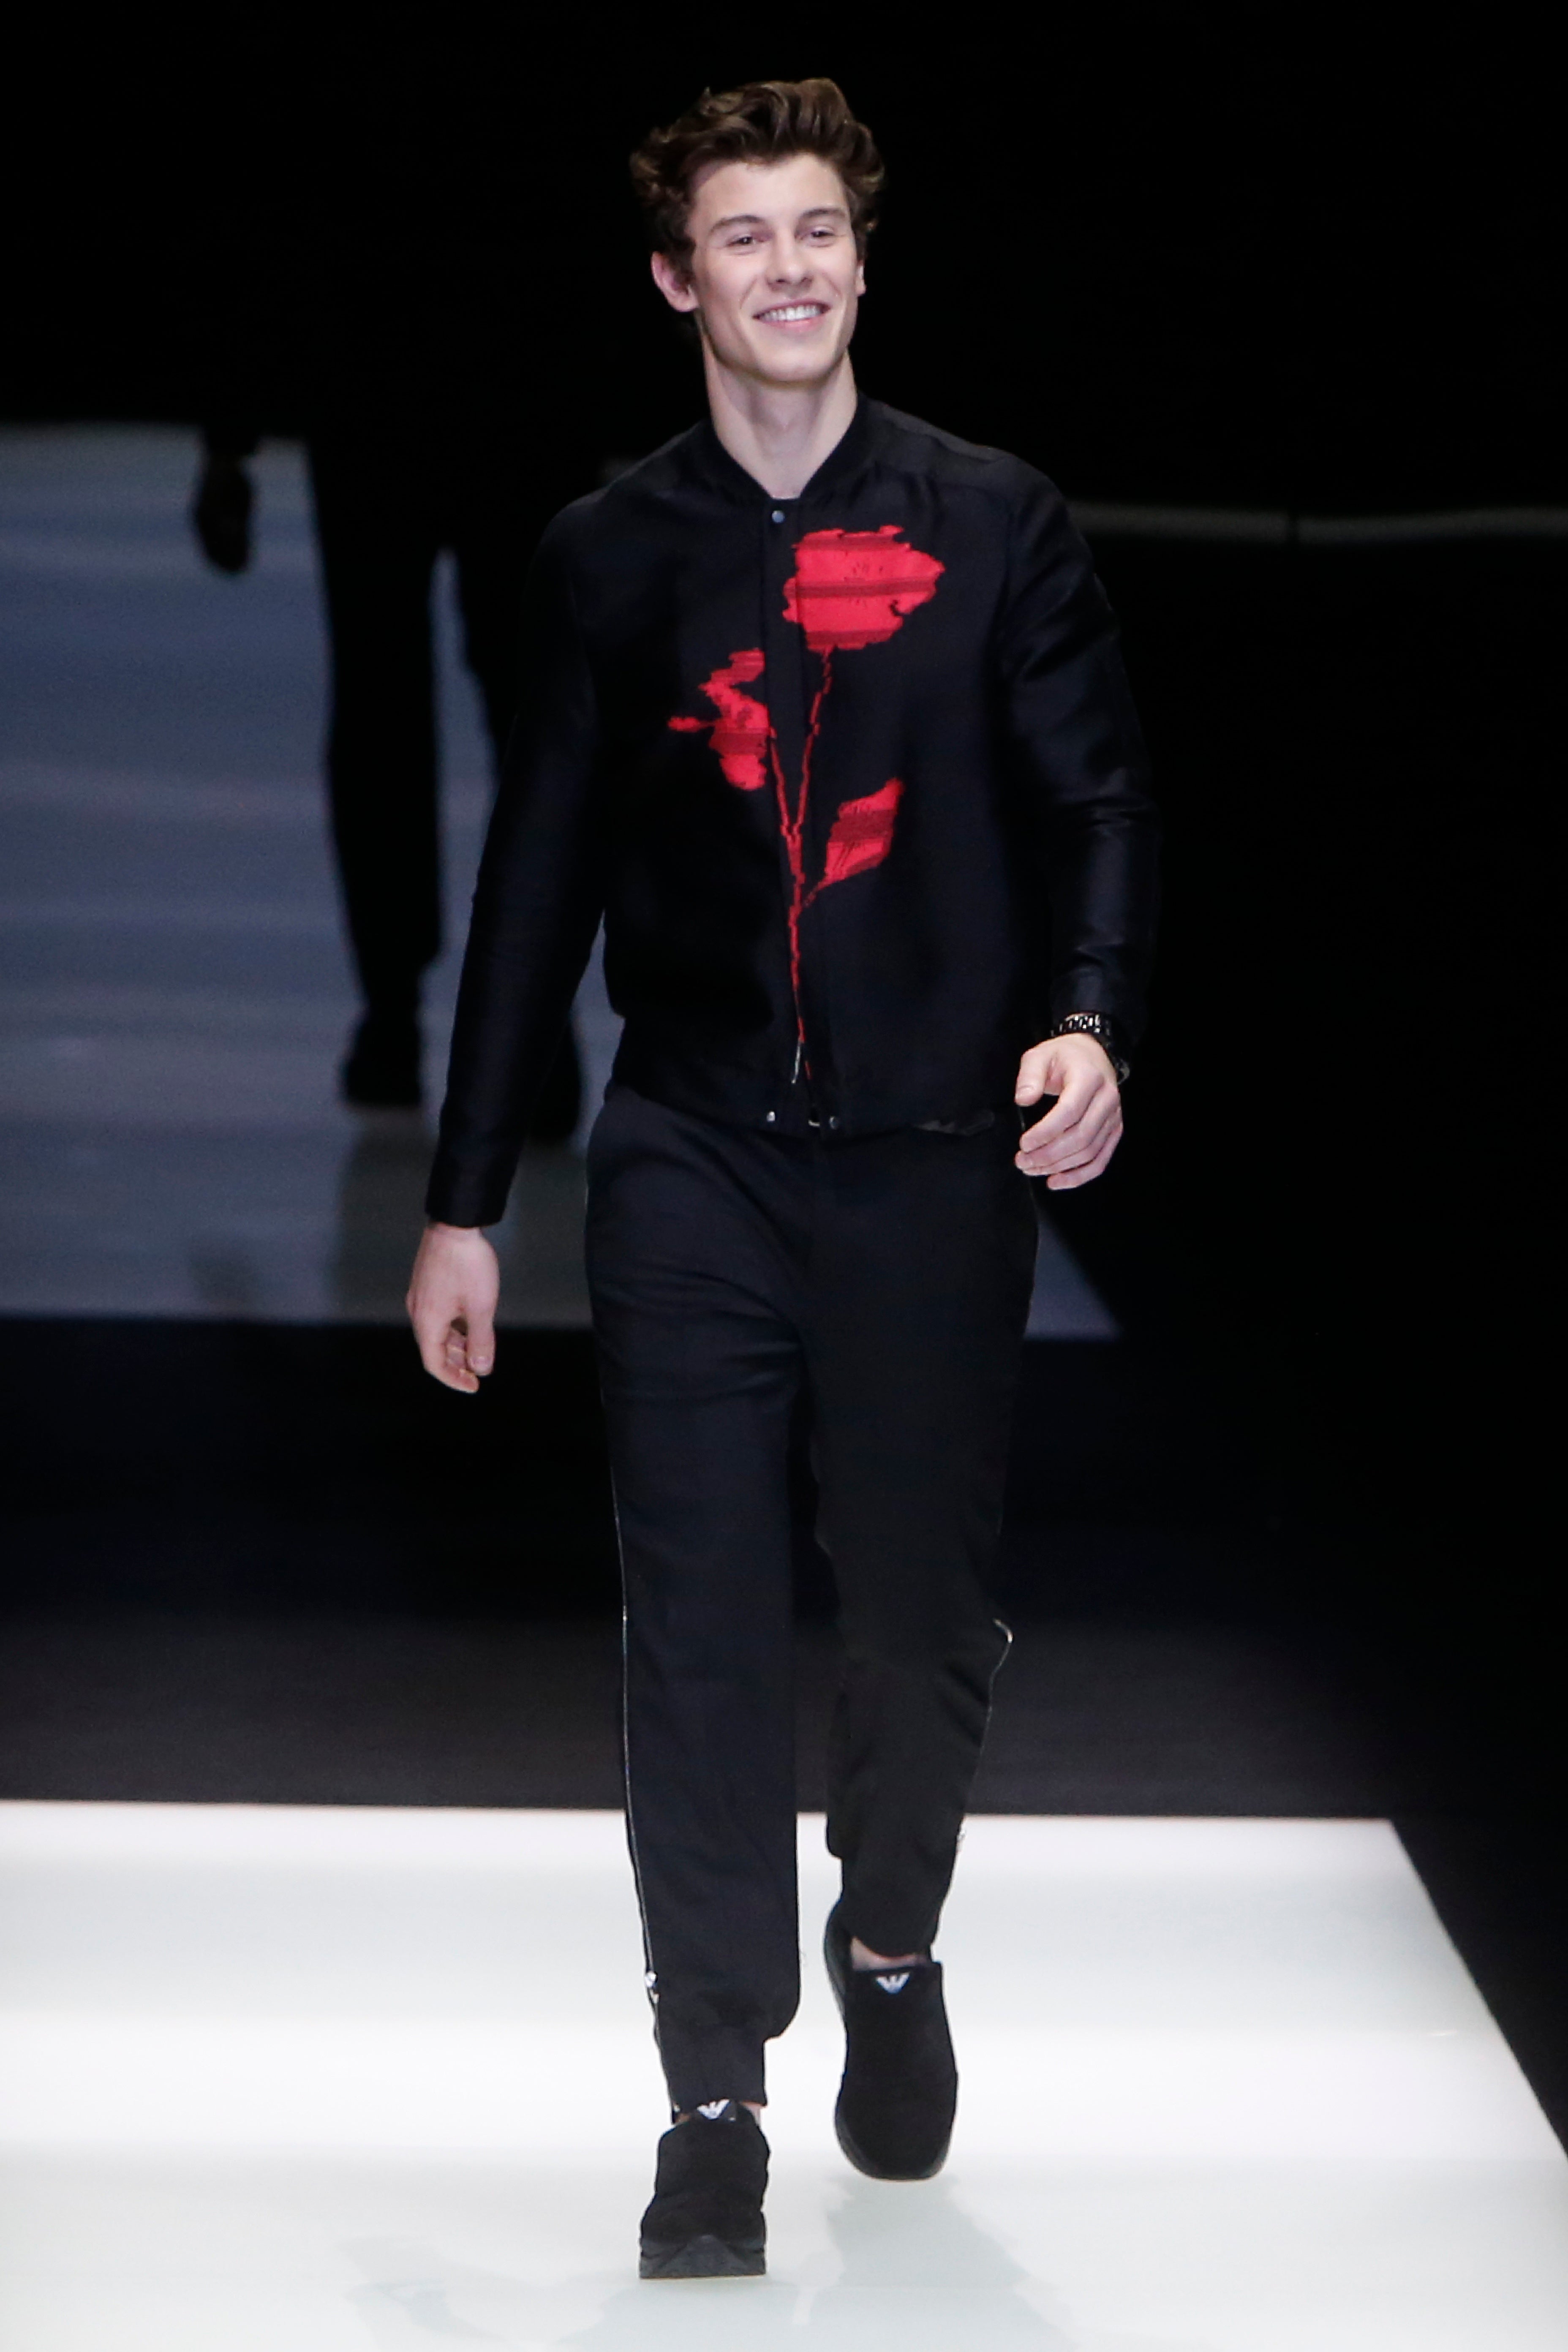 Shawn Mendes Slays the Runway During Armani's Men's Fashion Week Show in Italy ...3712 x 5568